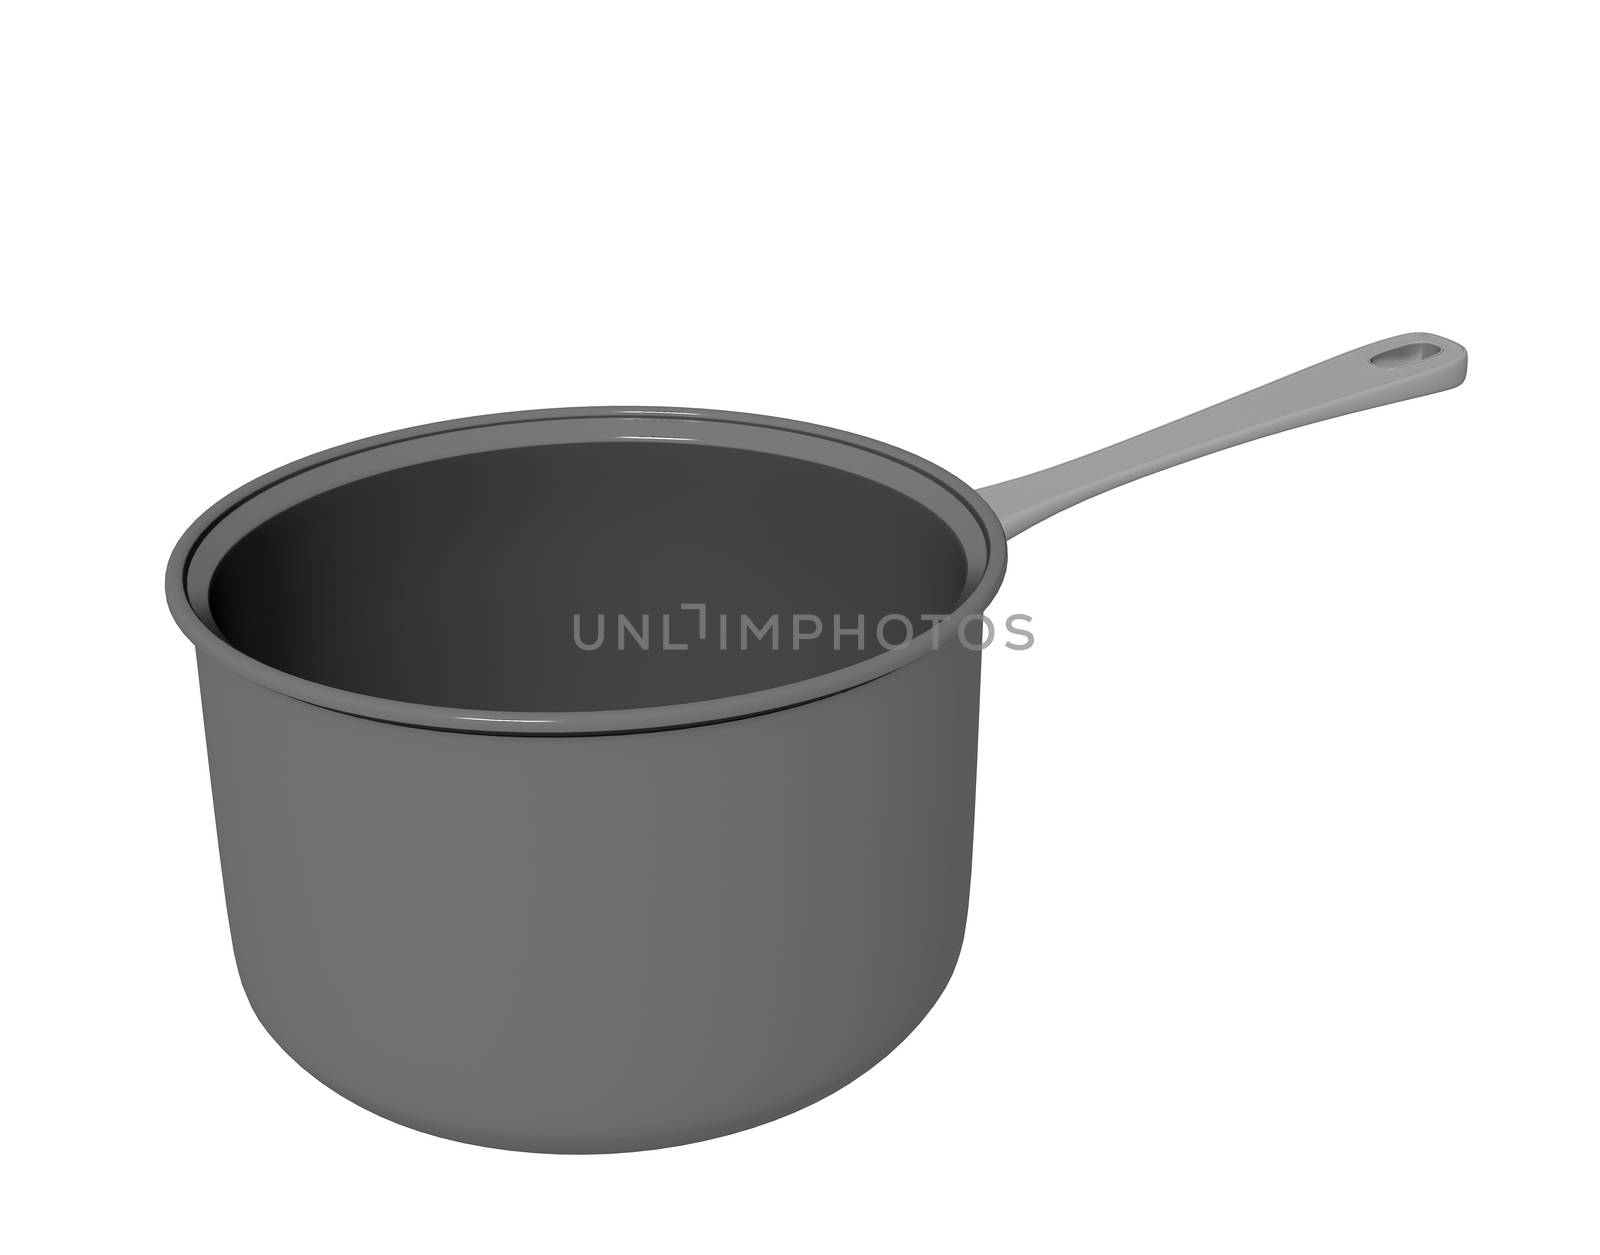 Black teflon coated or cast iron cooking pot, 3D illustration, isolated against a white background